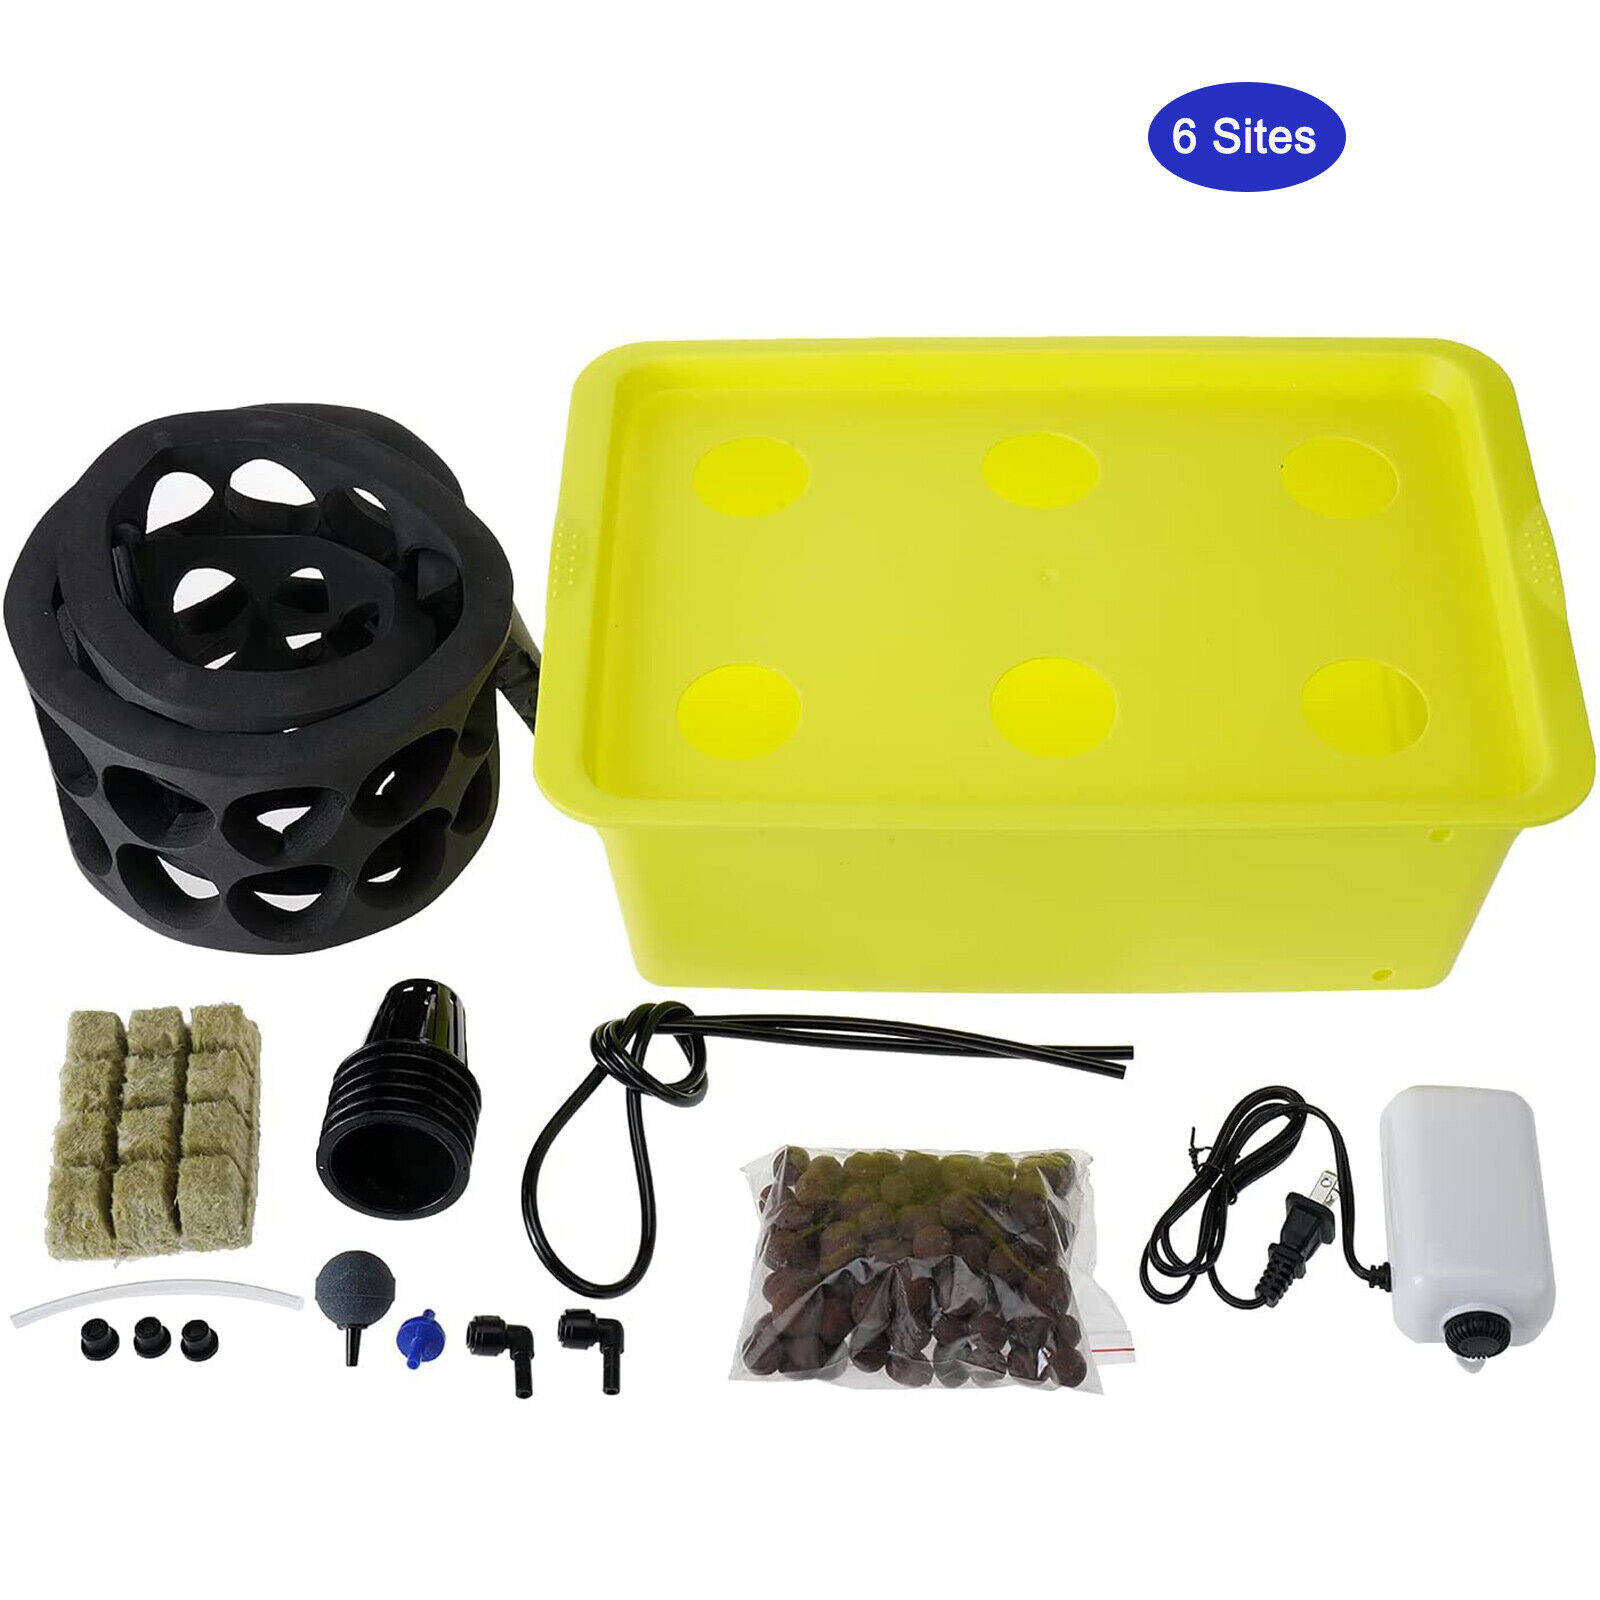 DWC Deep Water Culture Hydroponic System Grow Kit Portable Indoor Garden,6 Sites